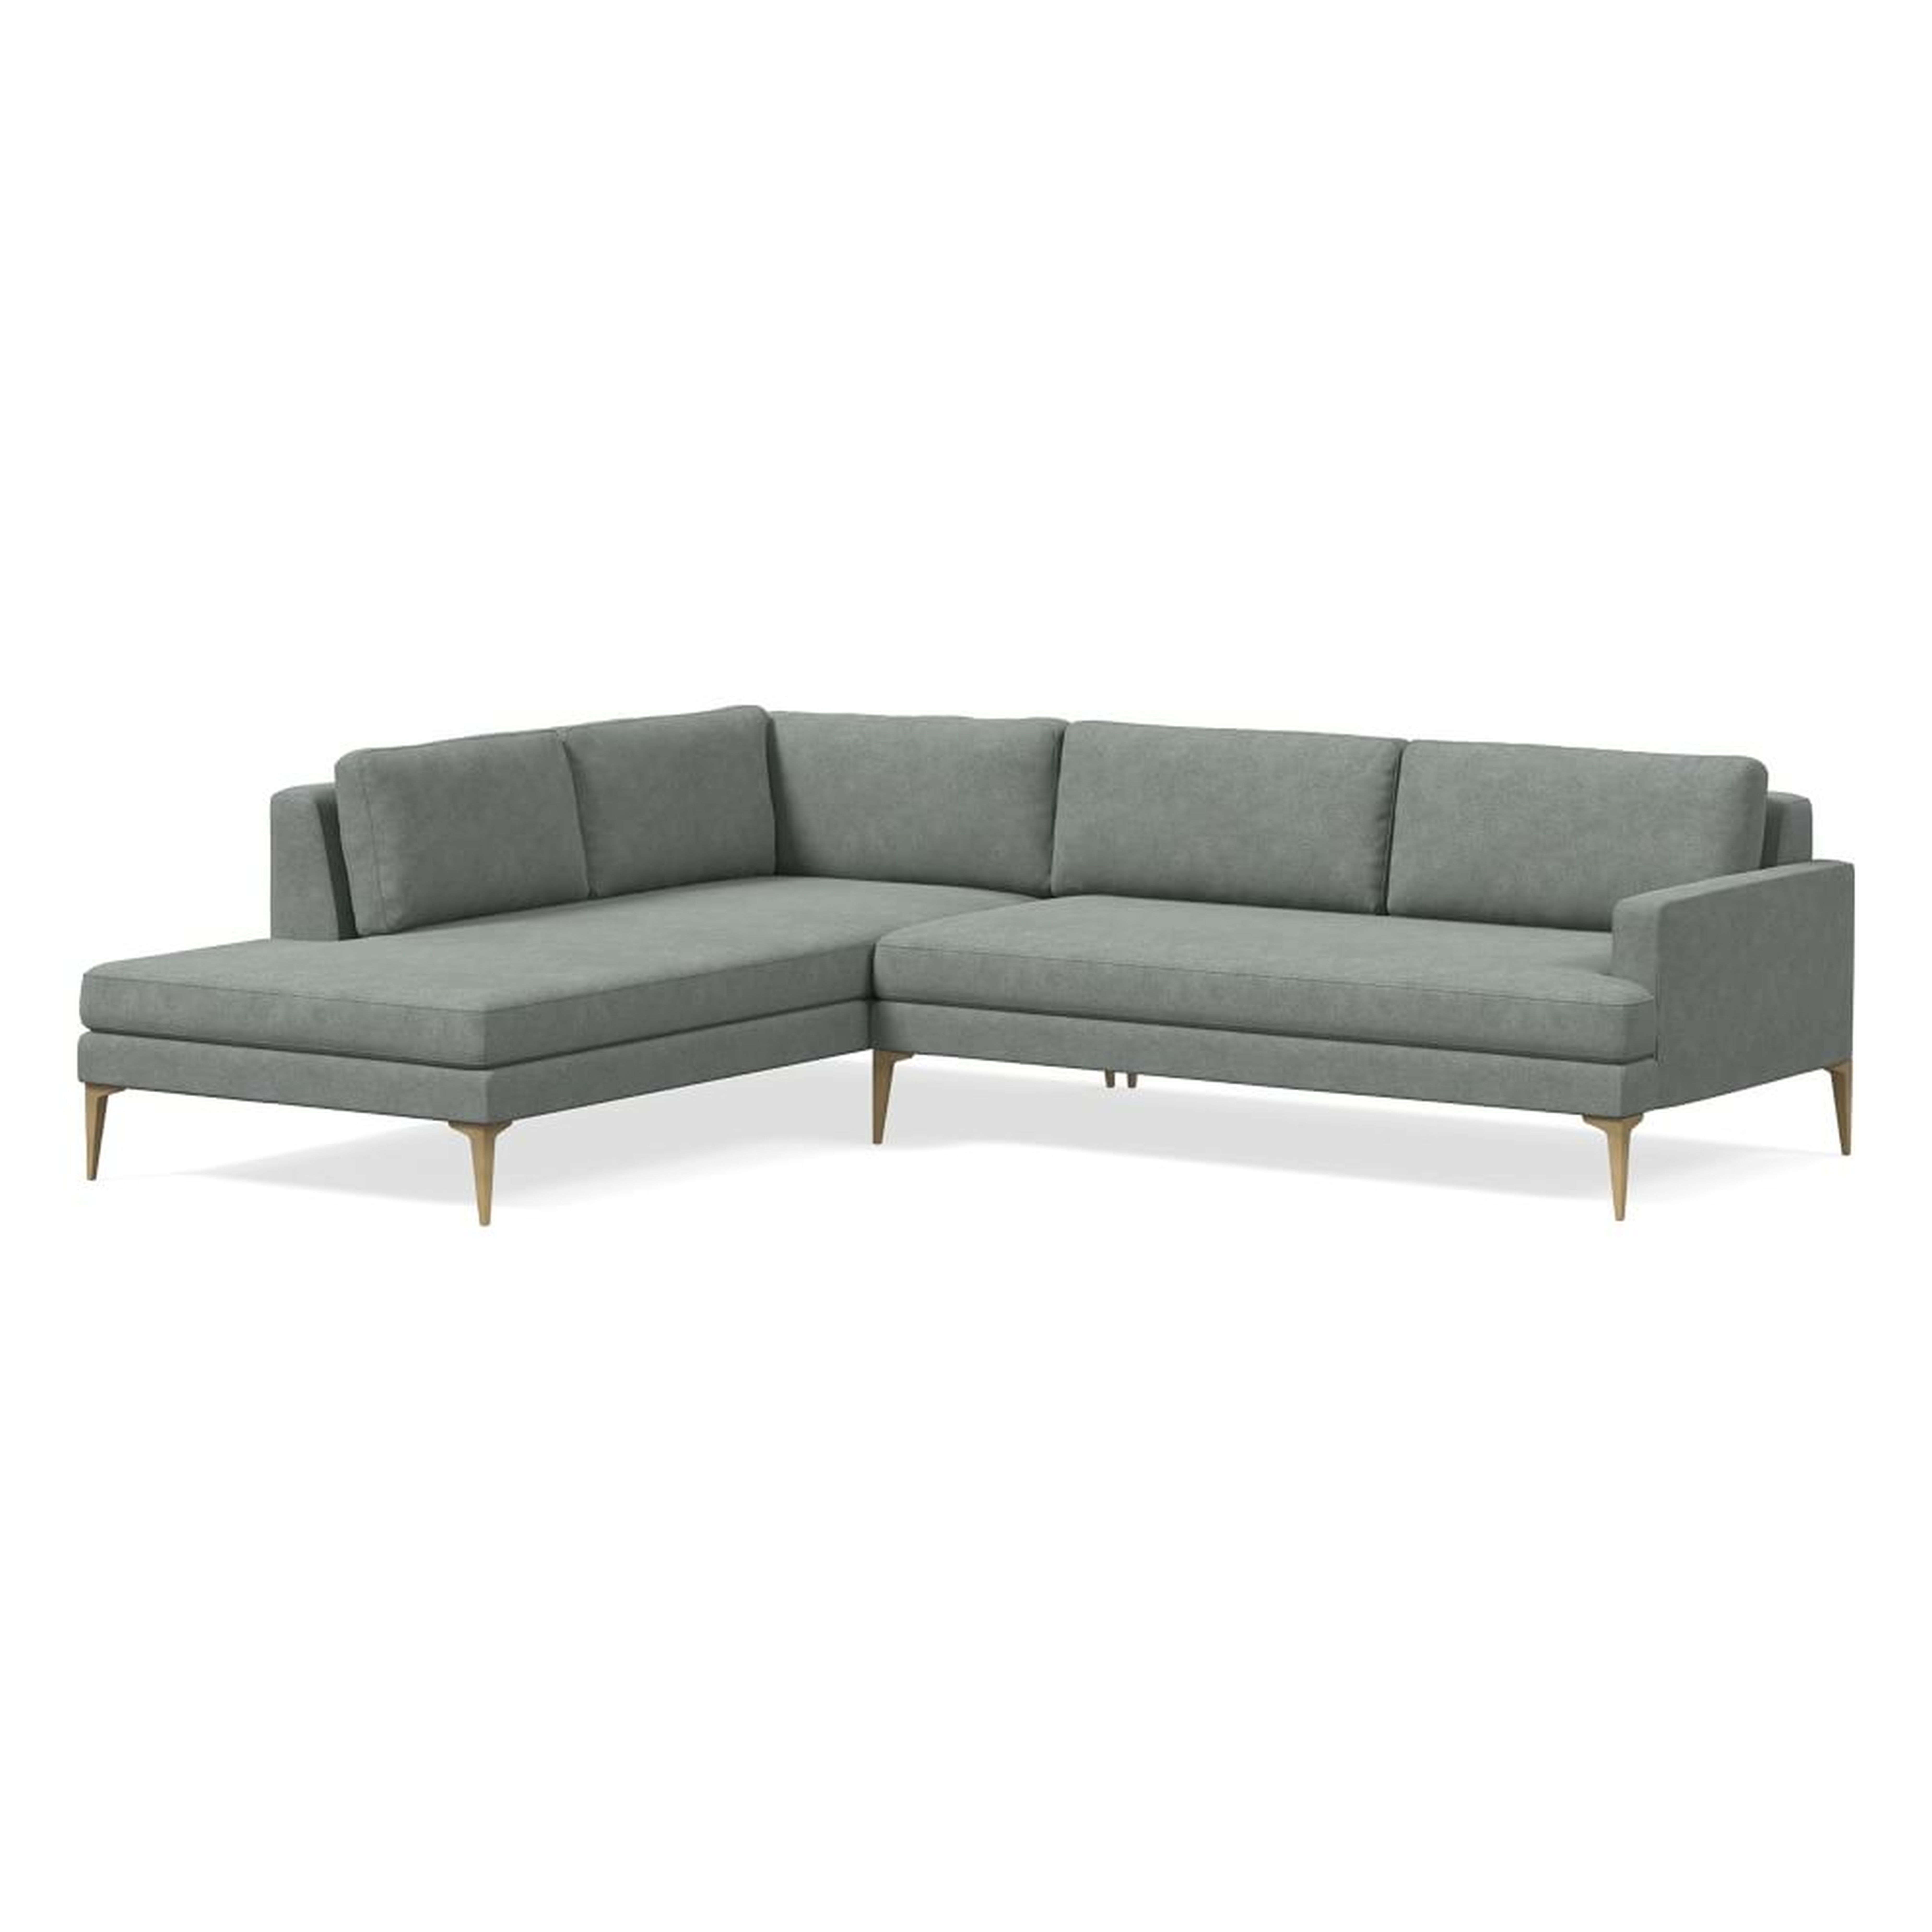 Andes 105" Left Multi Seat 2-Piece Bumper Chaise Sectional, Standard Depth, Distressed Velvet, Mineral Gray, BB - West Elm